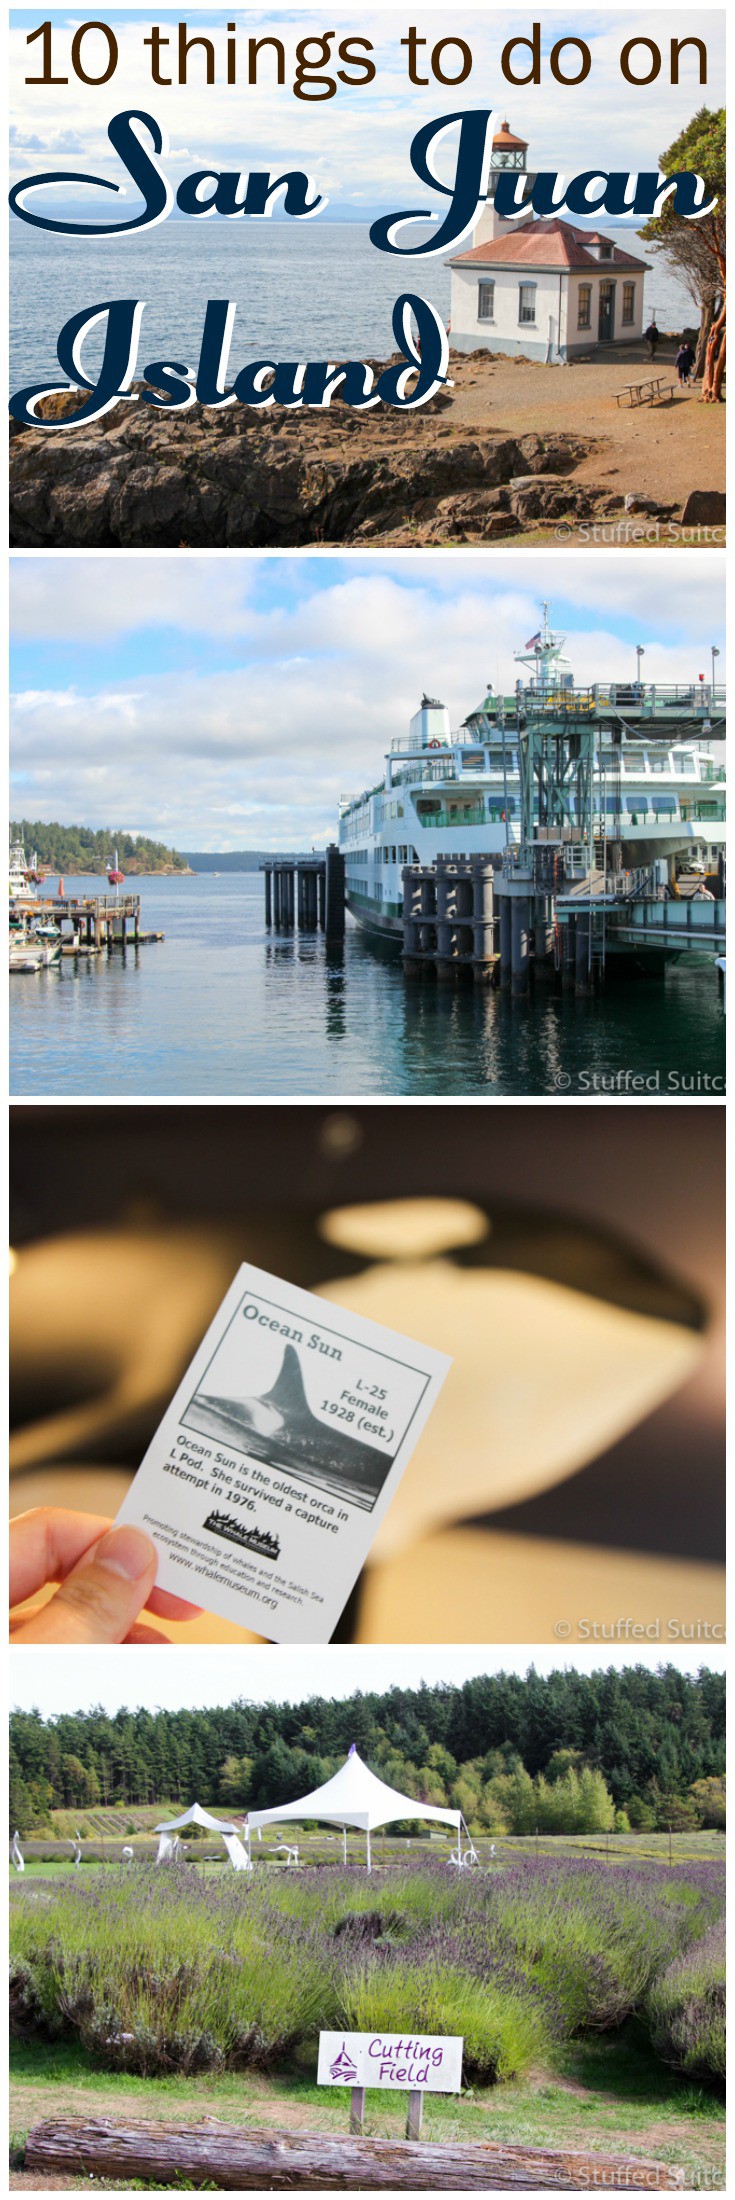 If you're taking a vacation to the west coast, be sure to plan a visit to the islands - San Juan Island is charming and full of activities perfect for family travel or adventure travel.